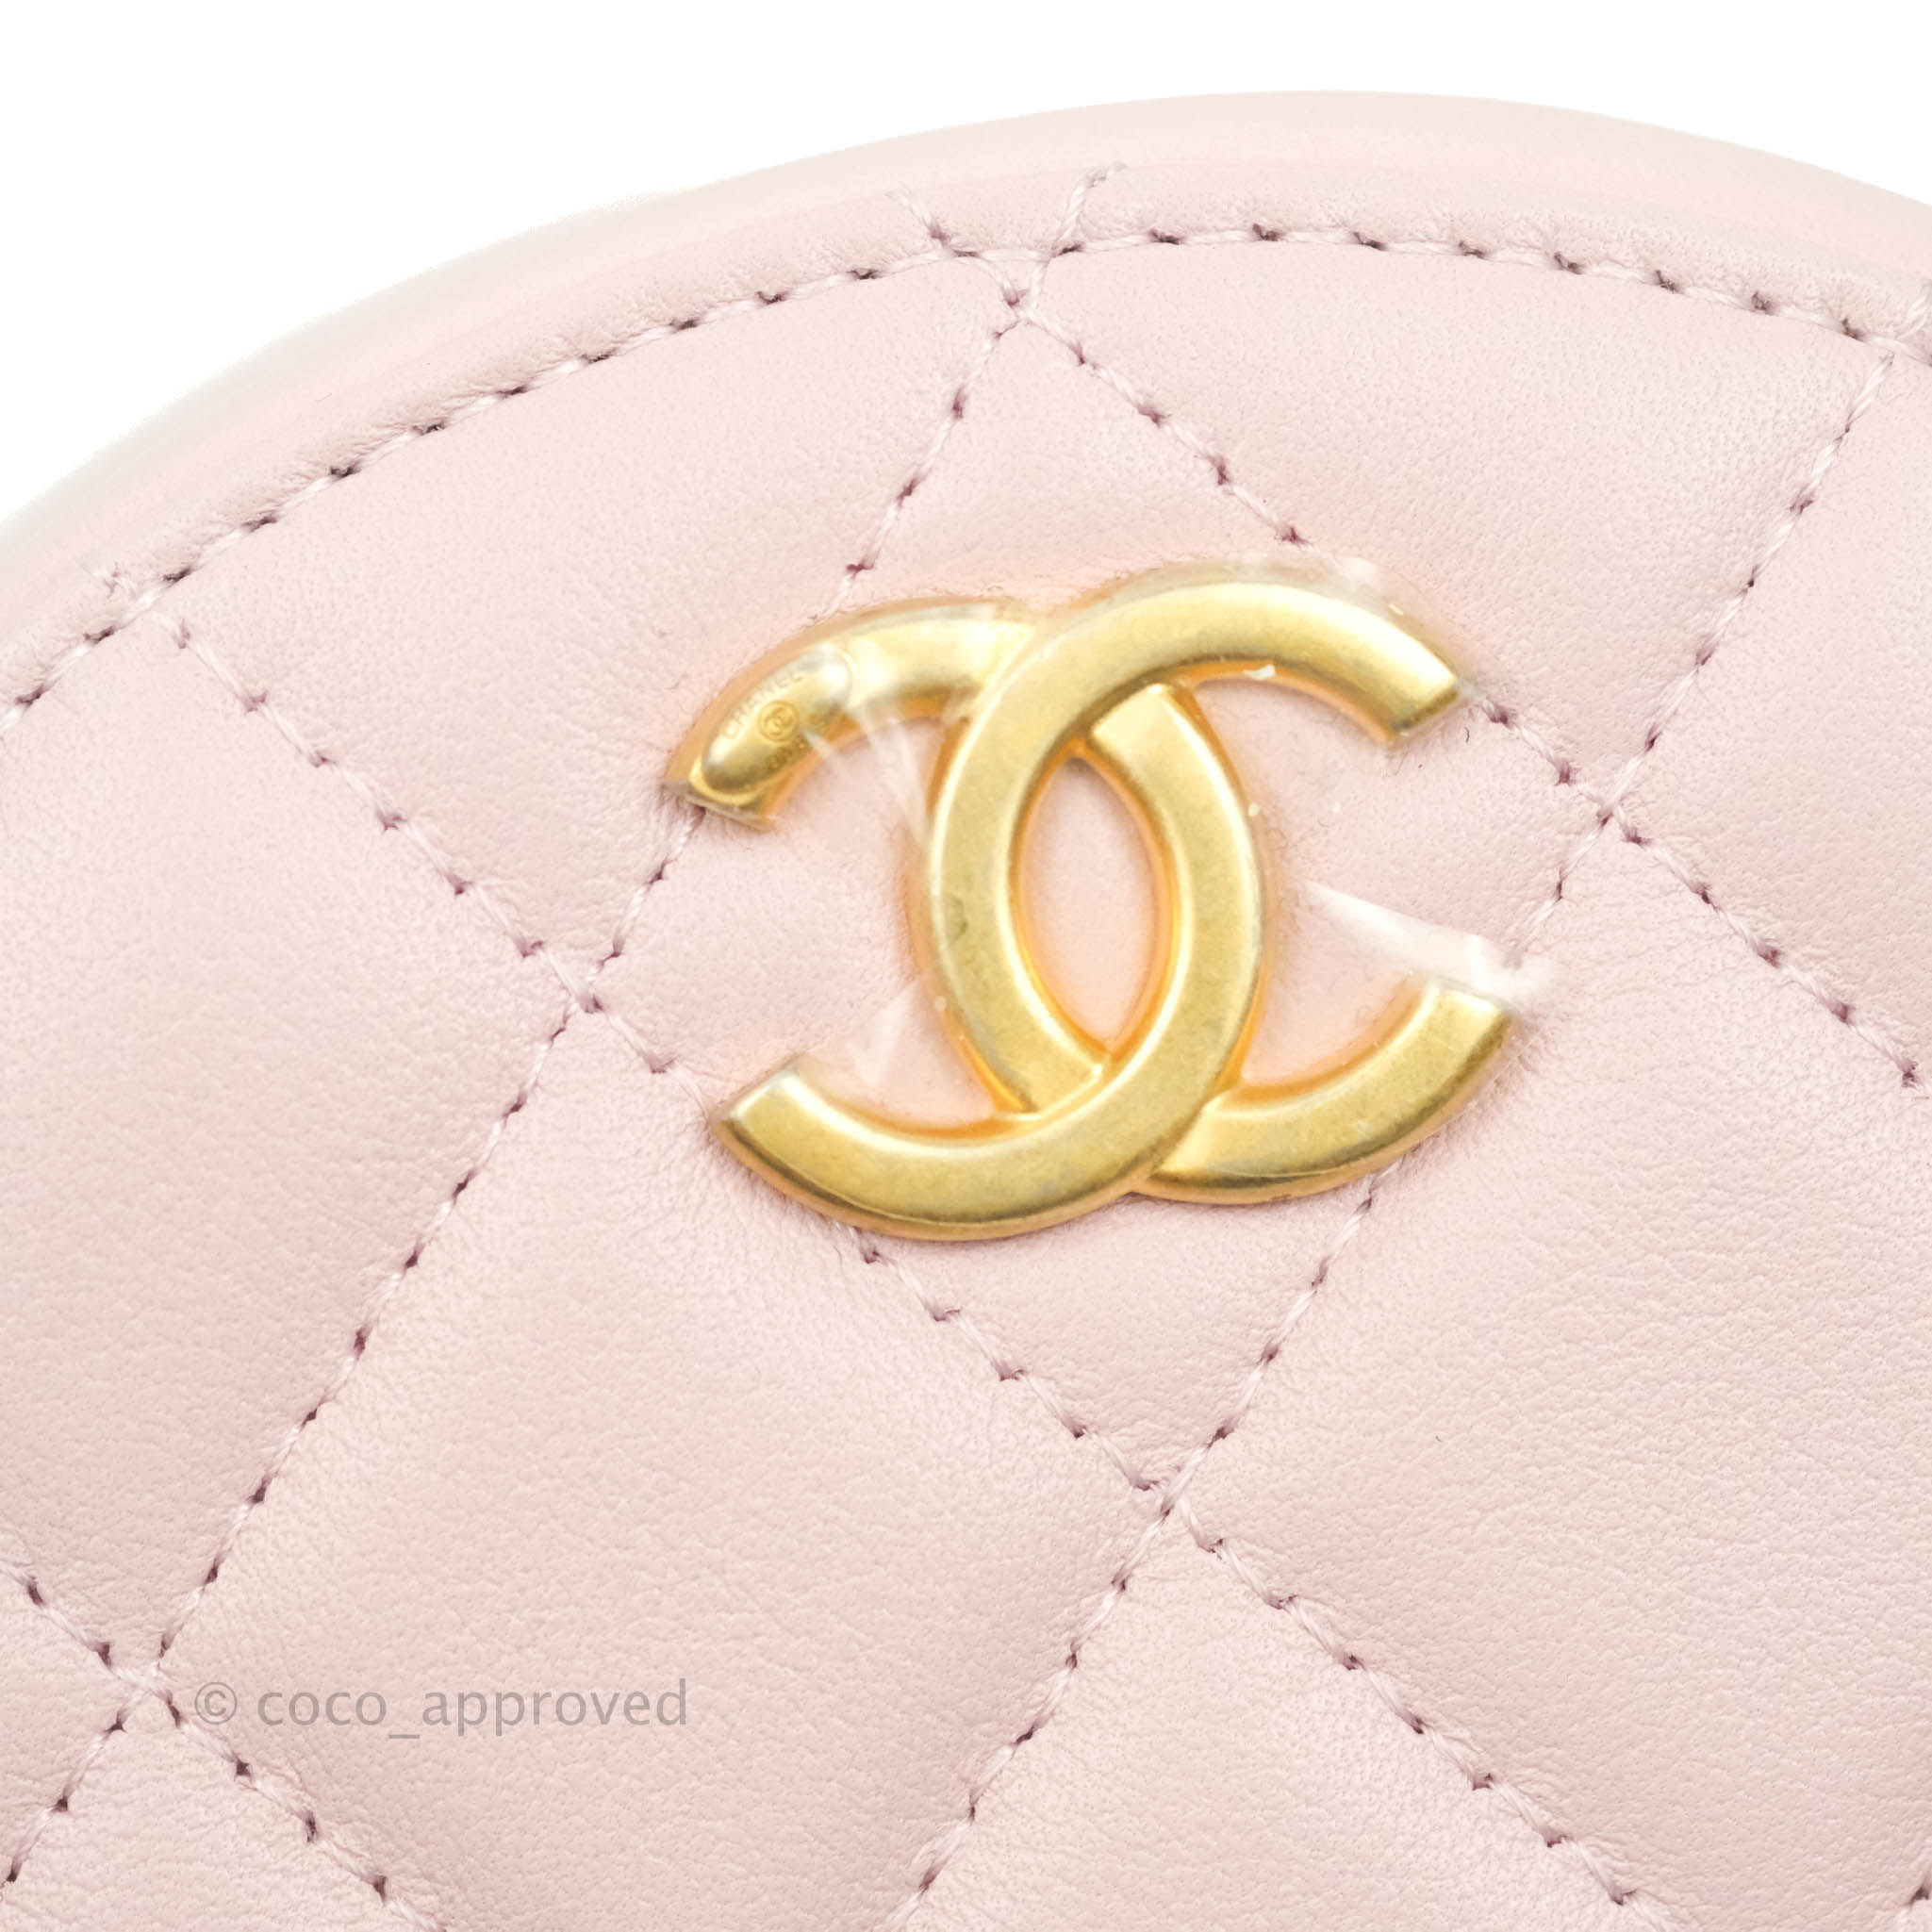 Replica Chanel Gabrielle Clutch With Chain A94505 Iridescent Pink